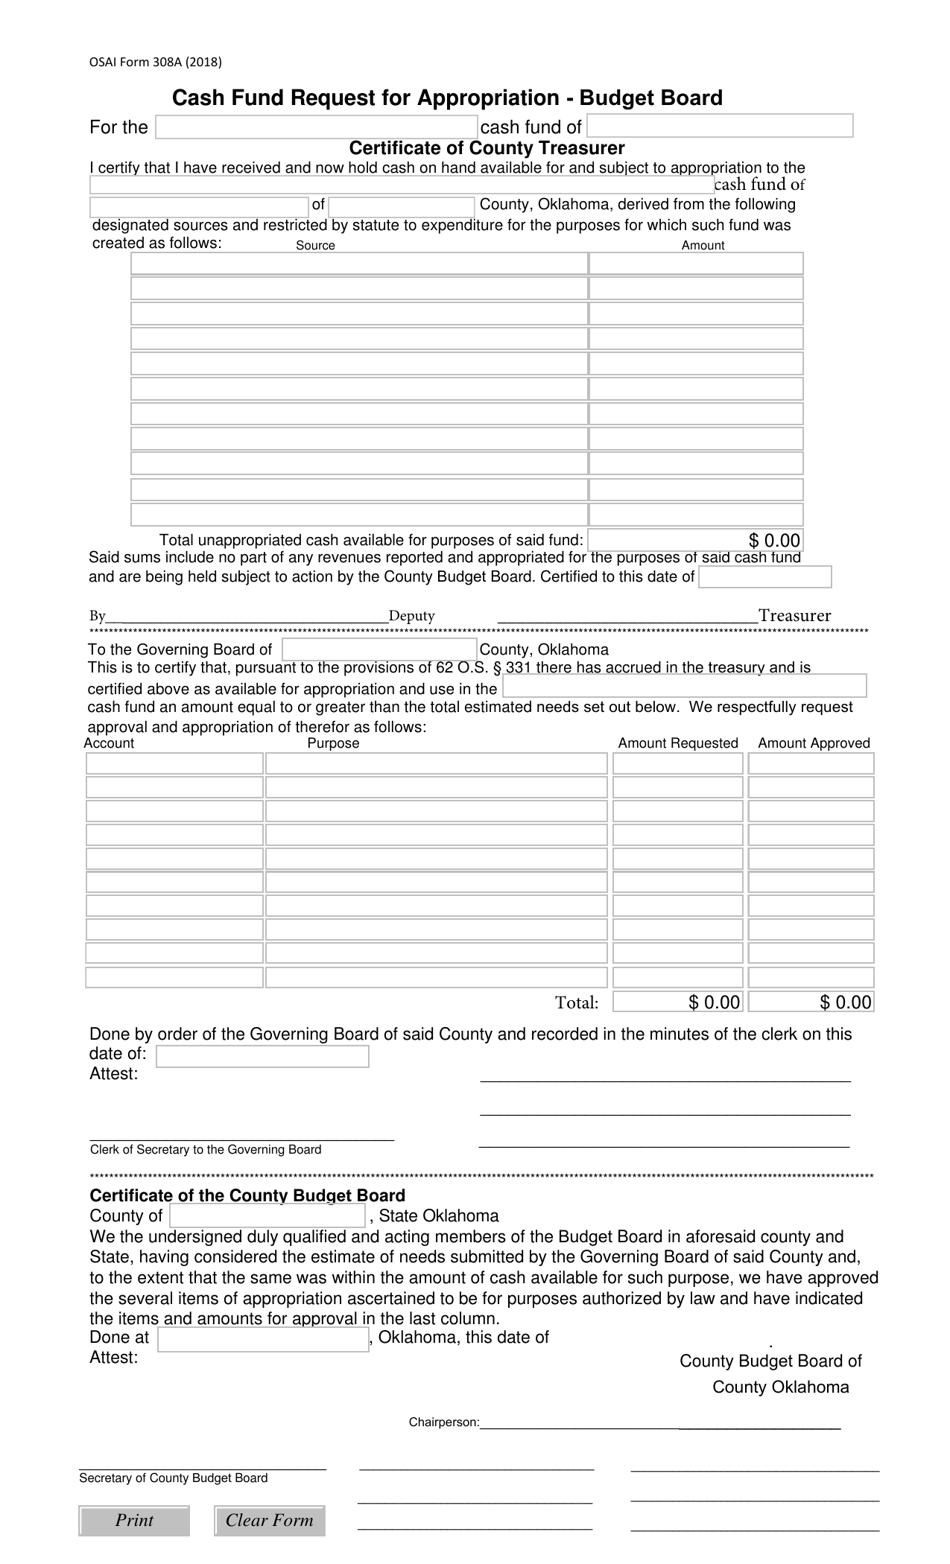 OSAI Form 308A Cash Fund Request for Appropriation - Budget Board - Oklahoma, Page 1